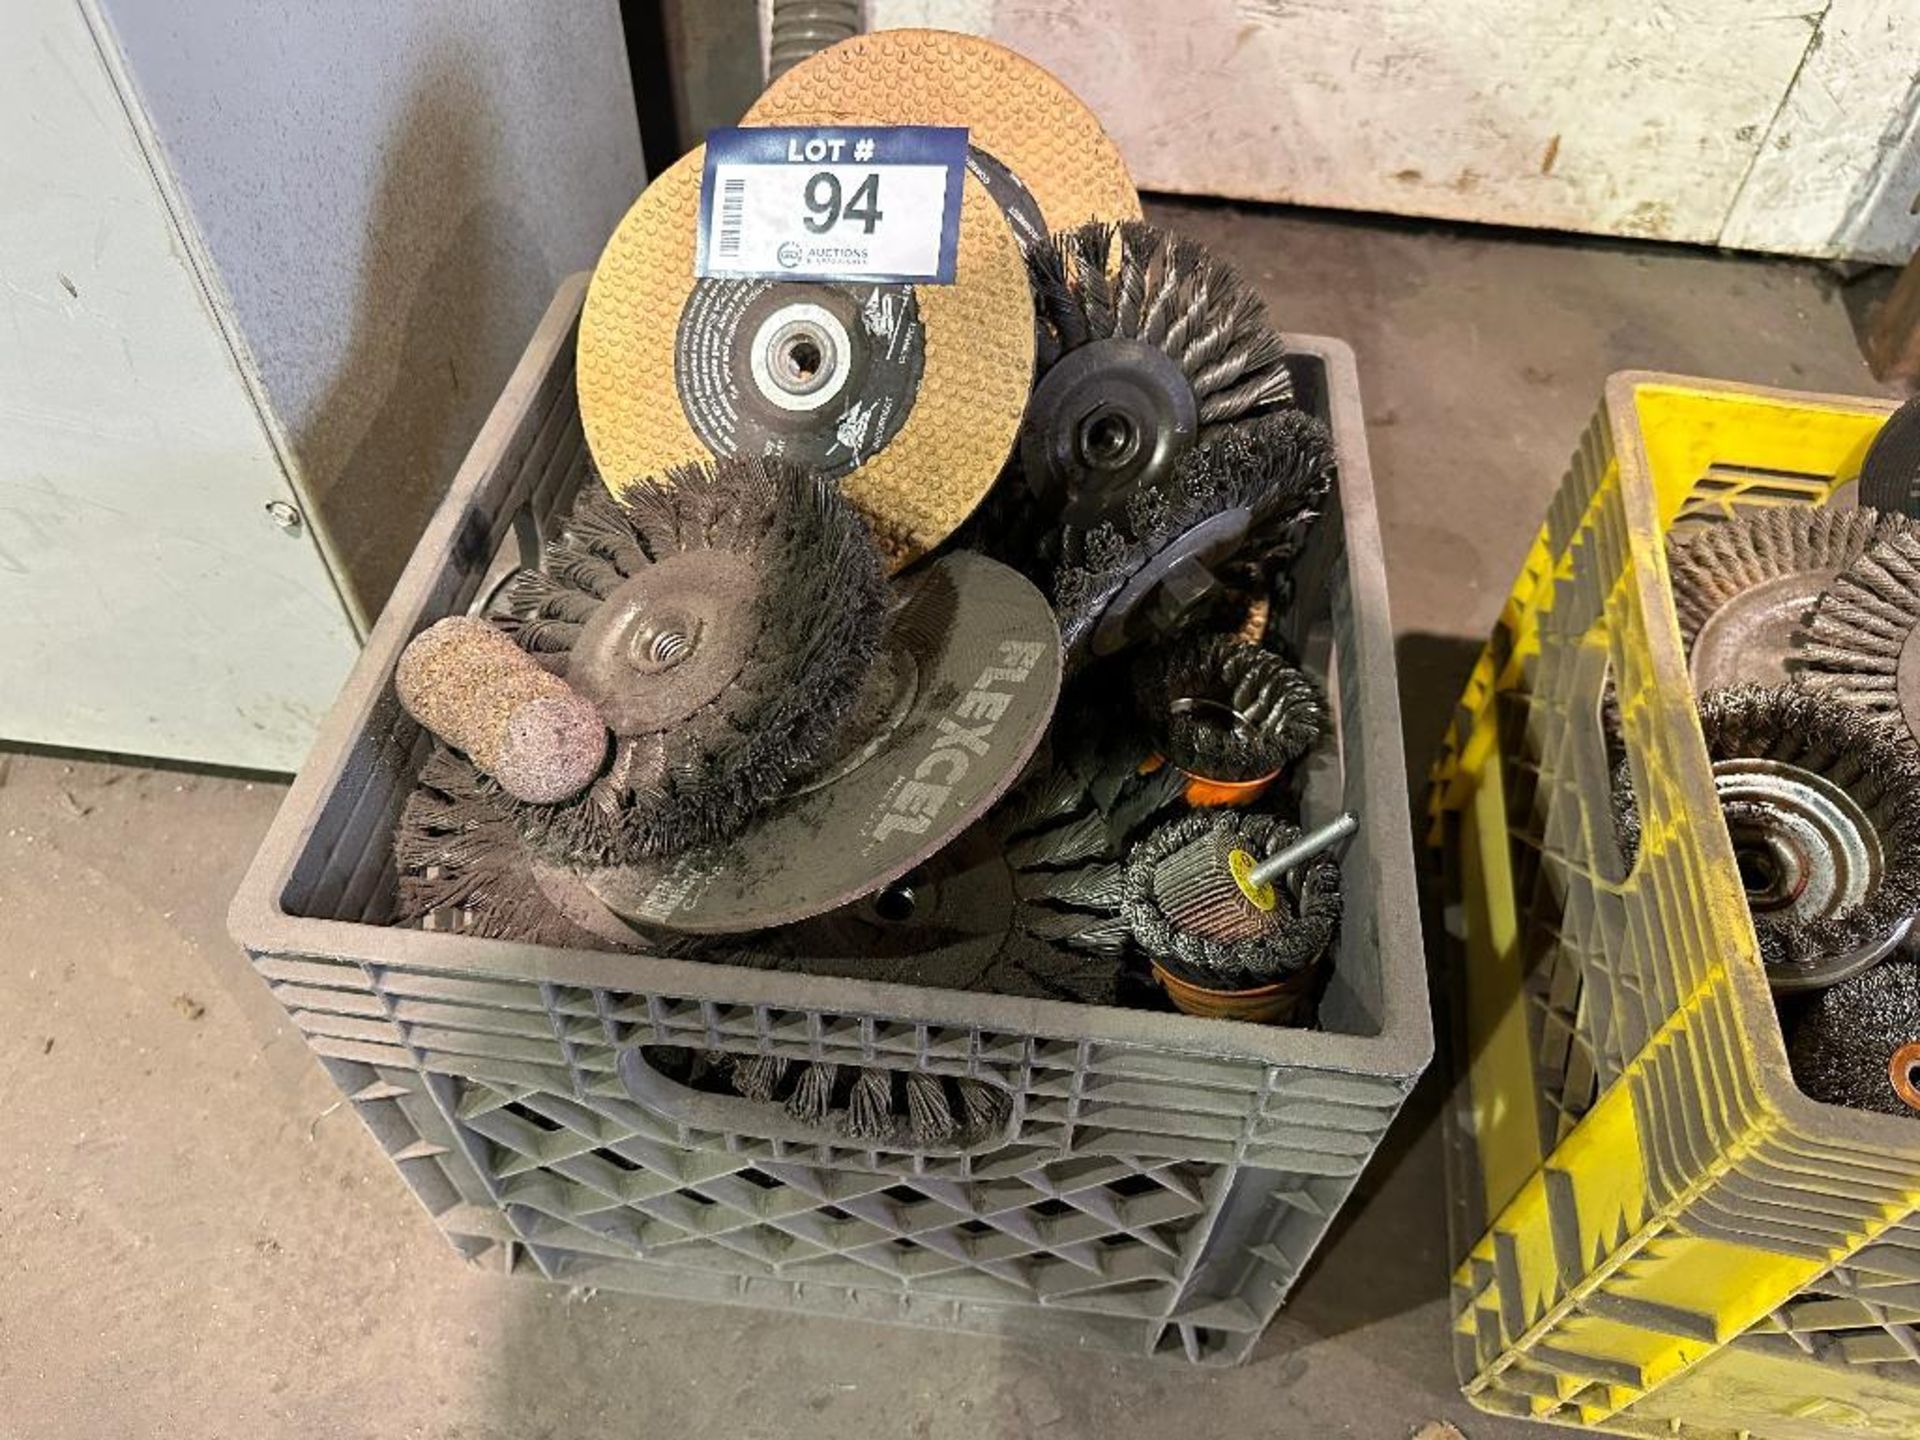 Crate of Asst. Wire Wheels, etc.